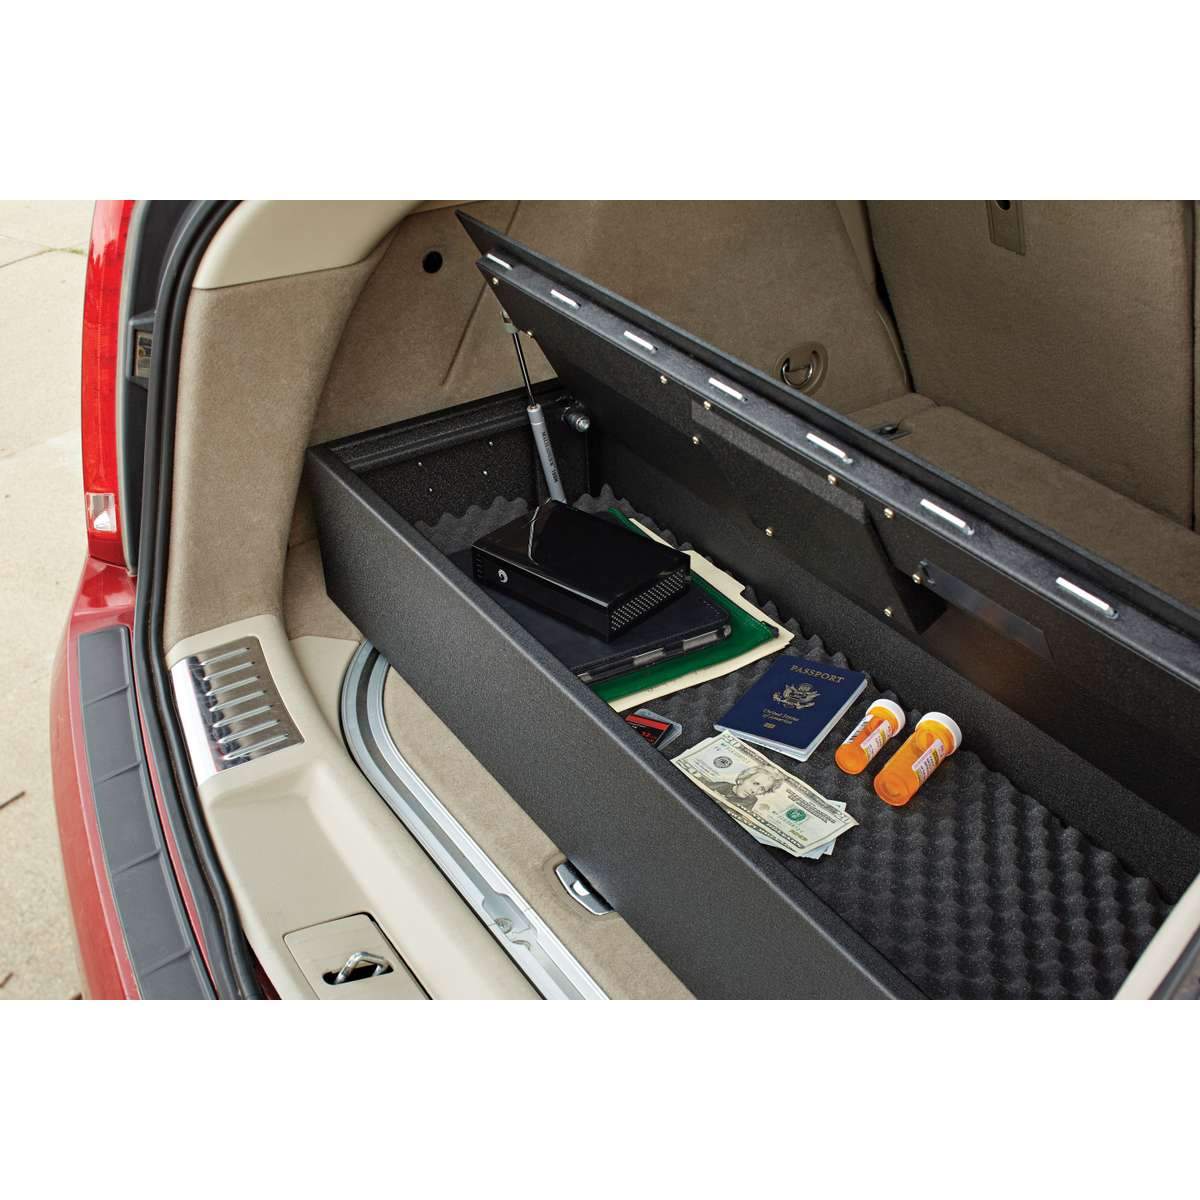 SnapSafe 75406 Trunk Safe II in back of vehicle open with contents